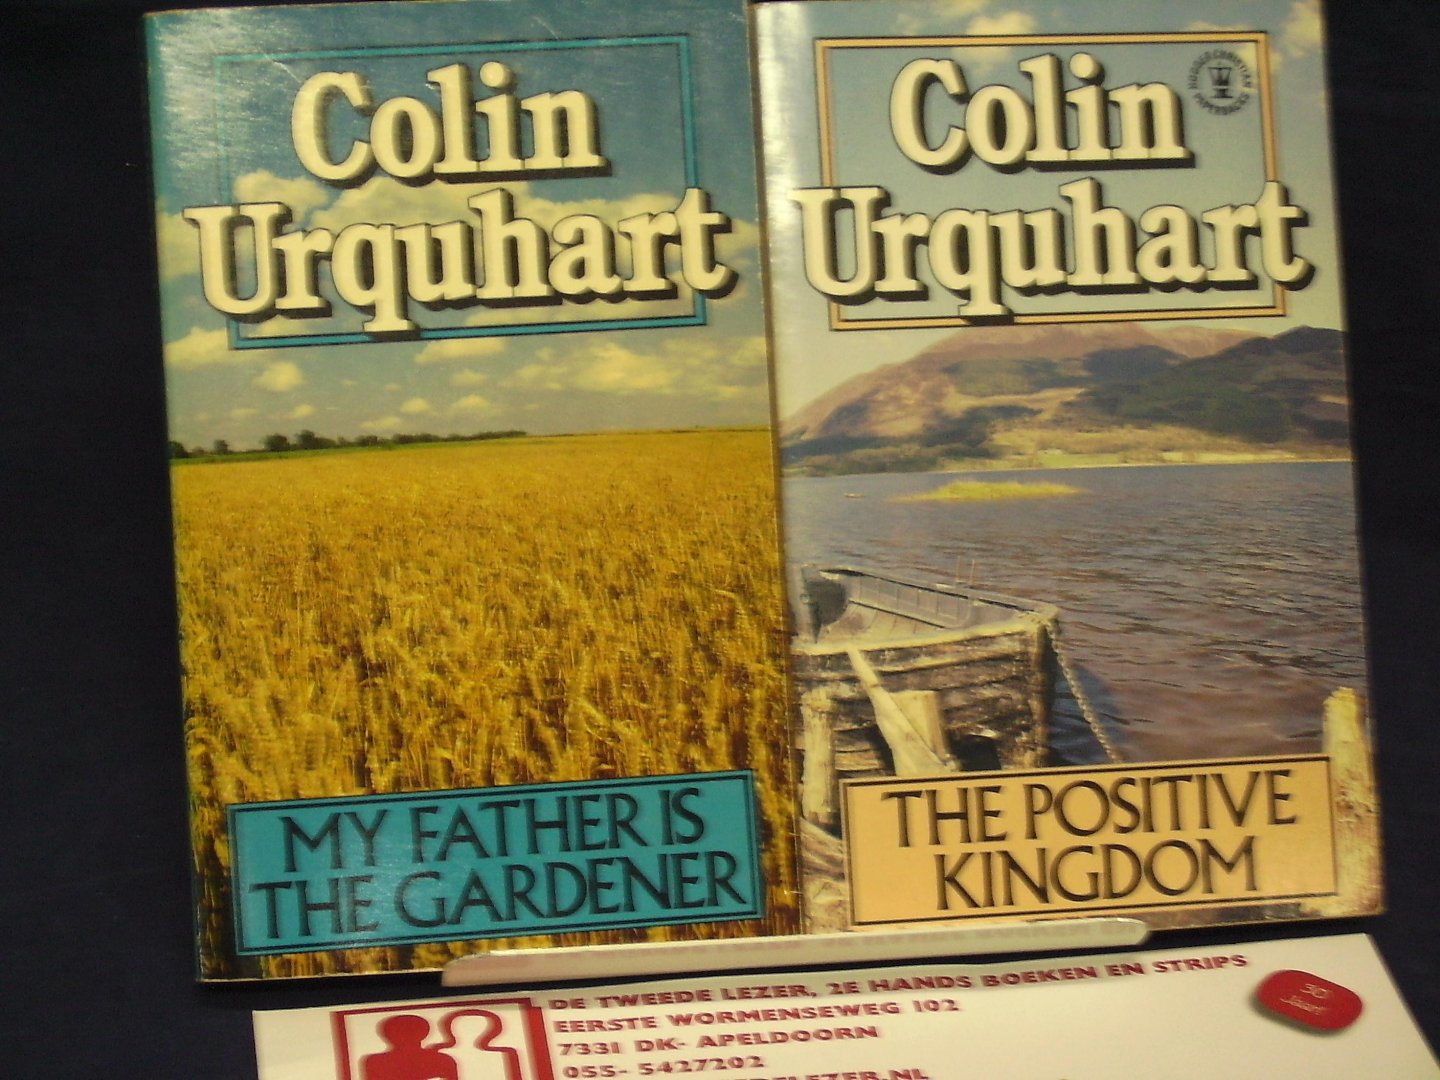 Urquhart, Colin - My Father is the Garderner